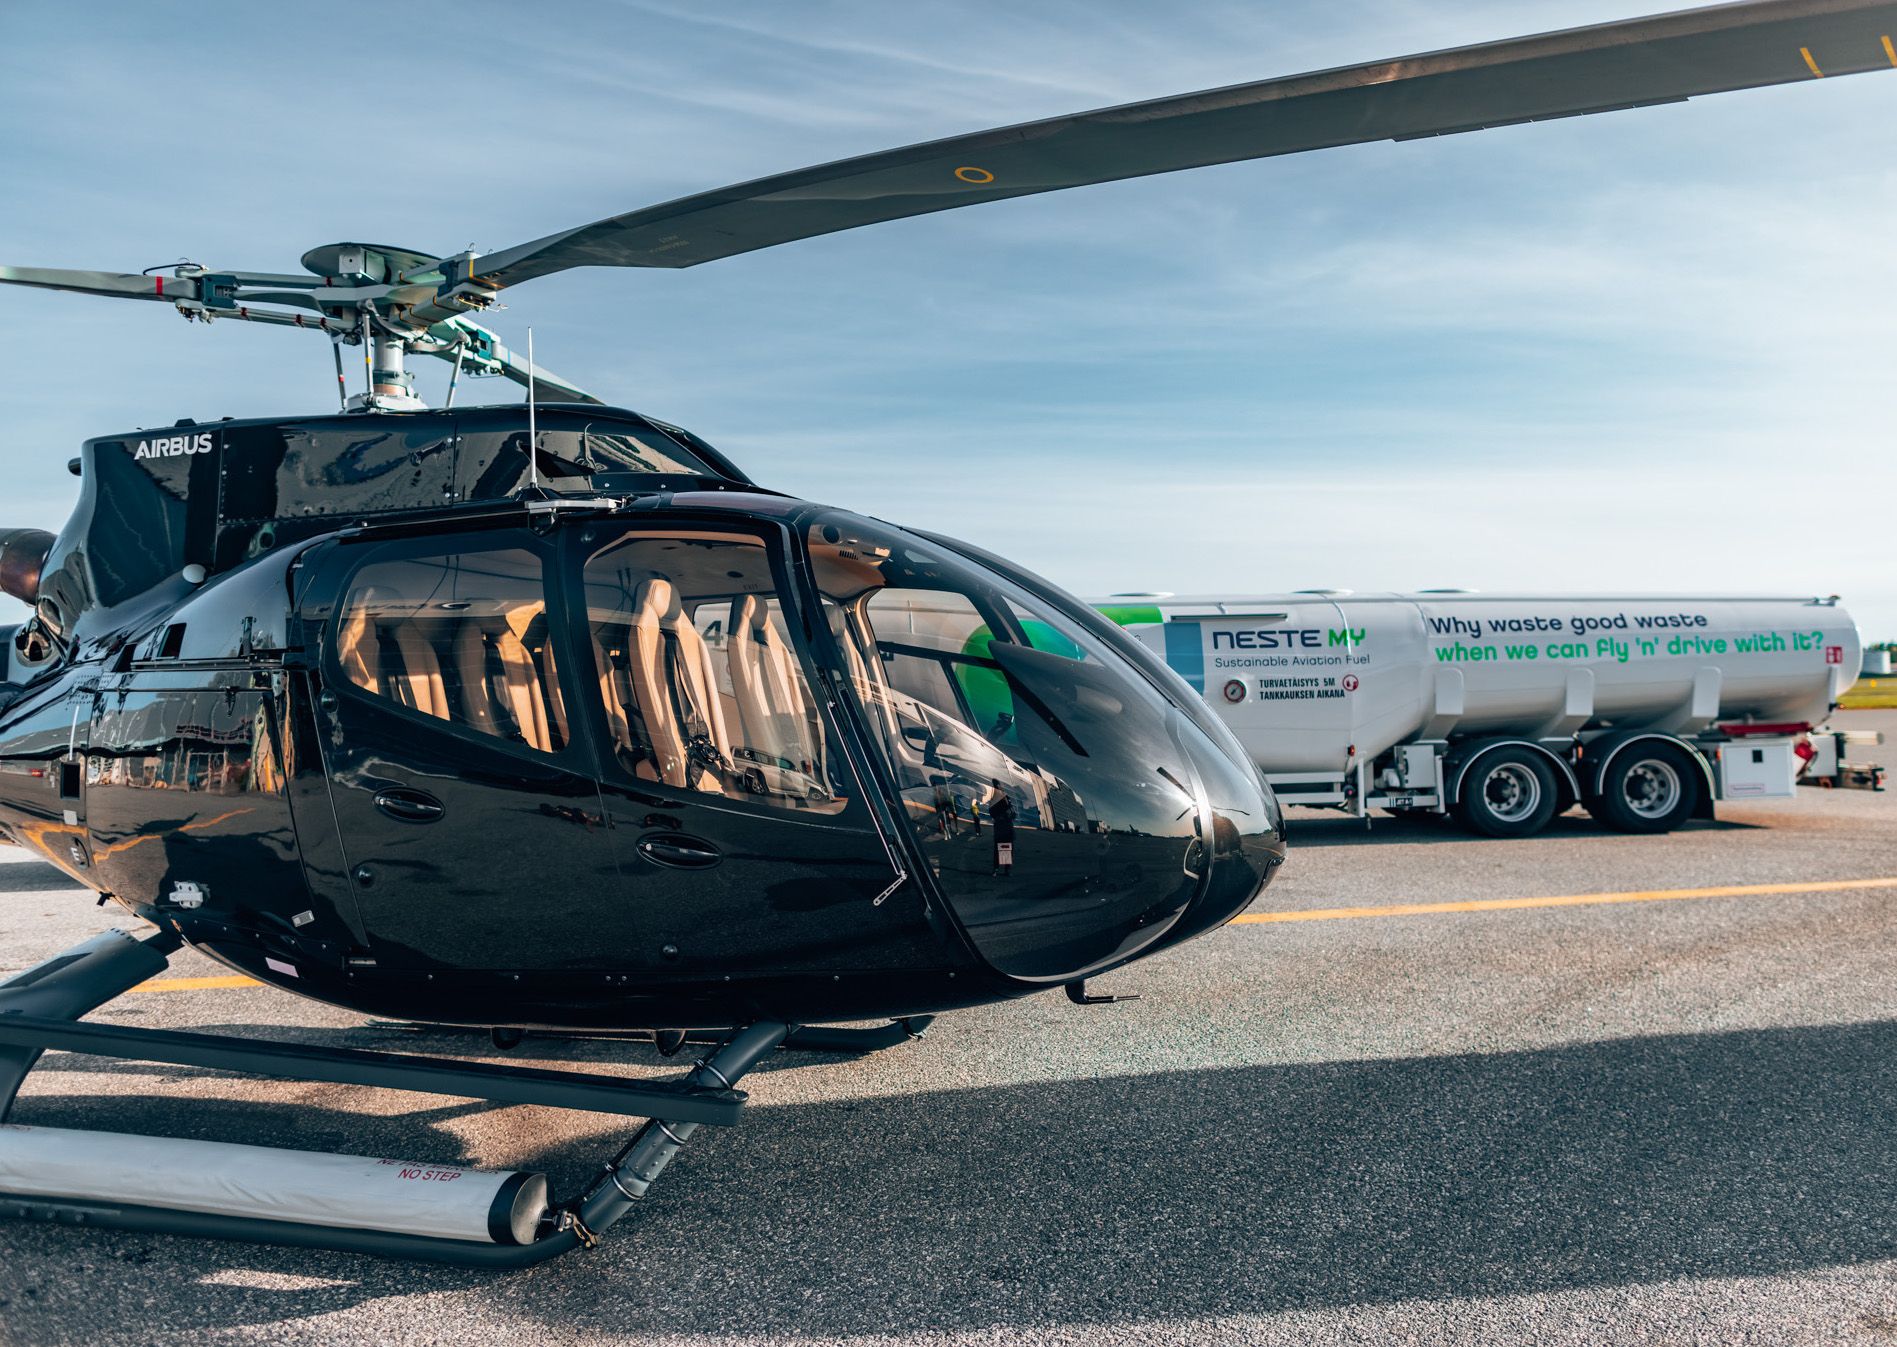 Airbus helicopter on apron with Neste refueling truck in the background